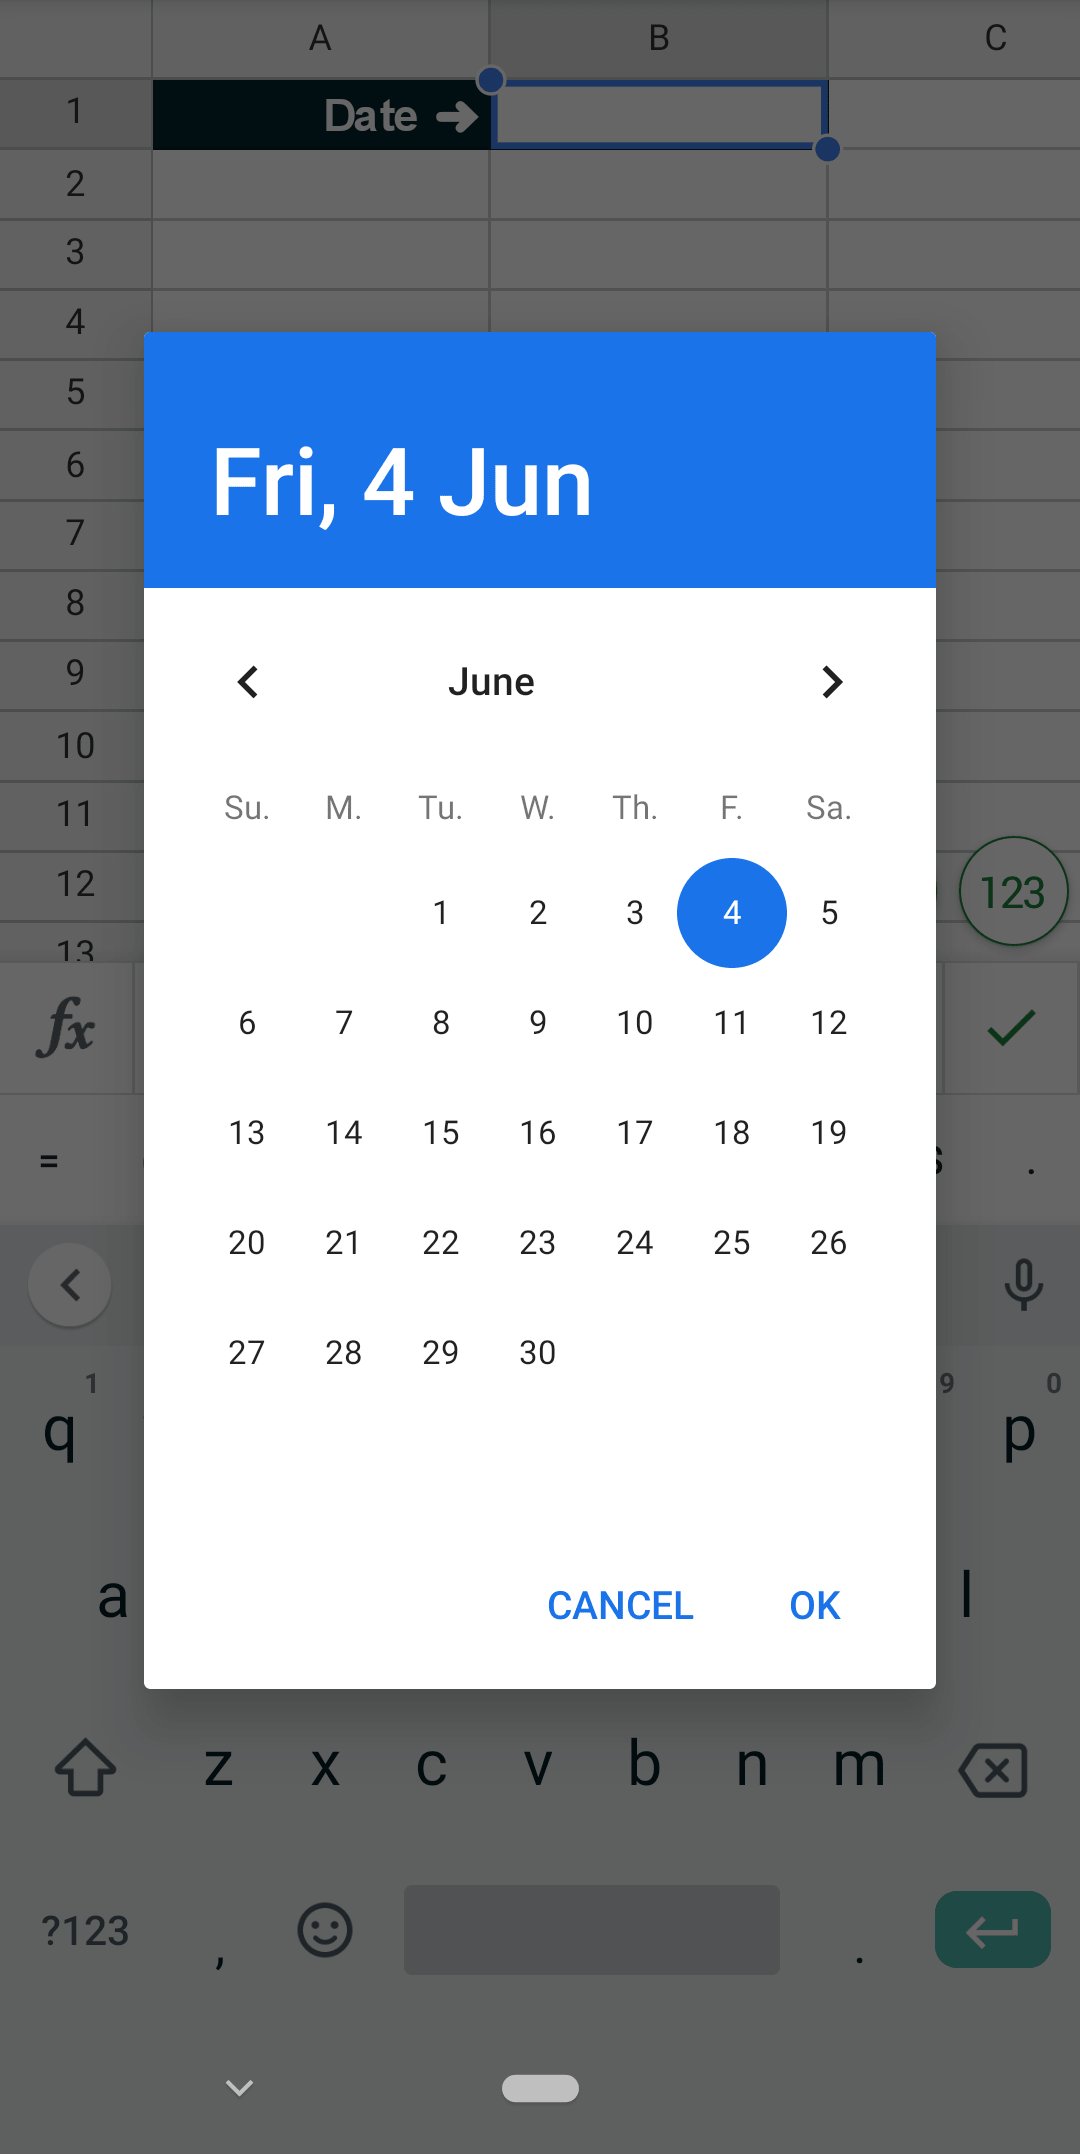 shows what the actual date picker looks like in the android app